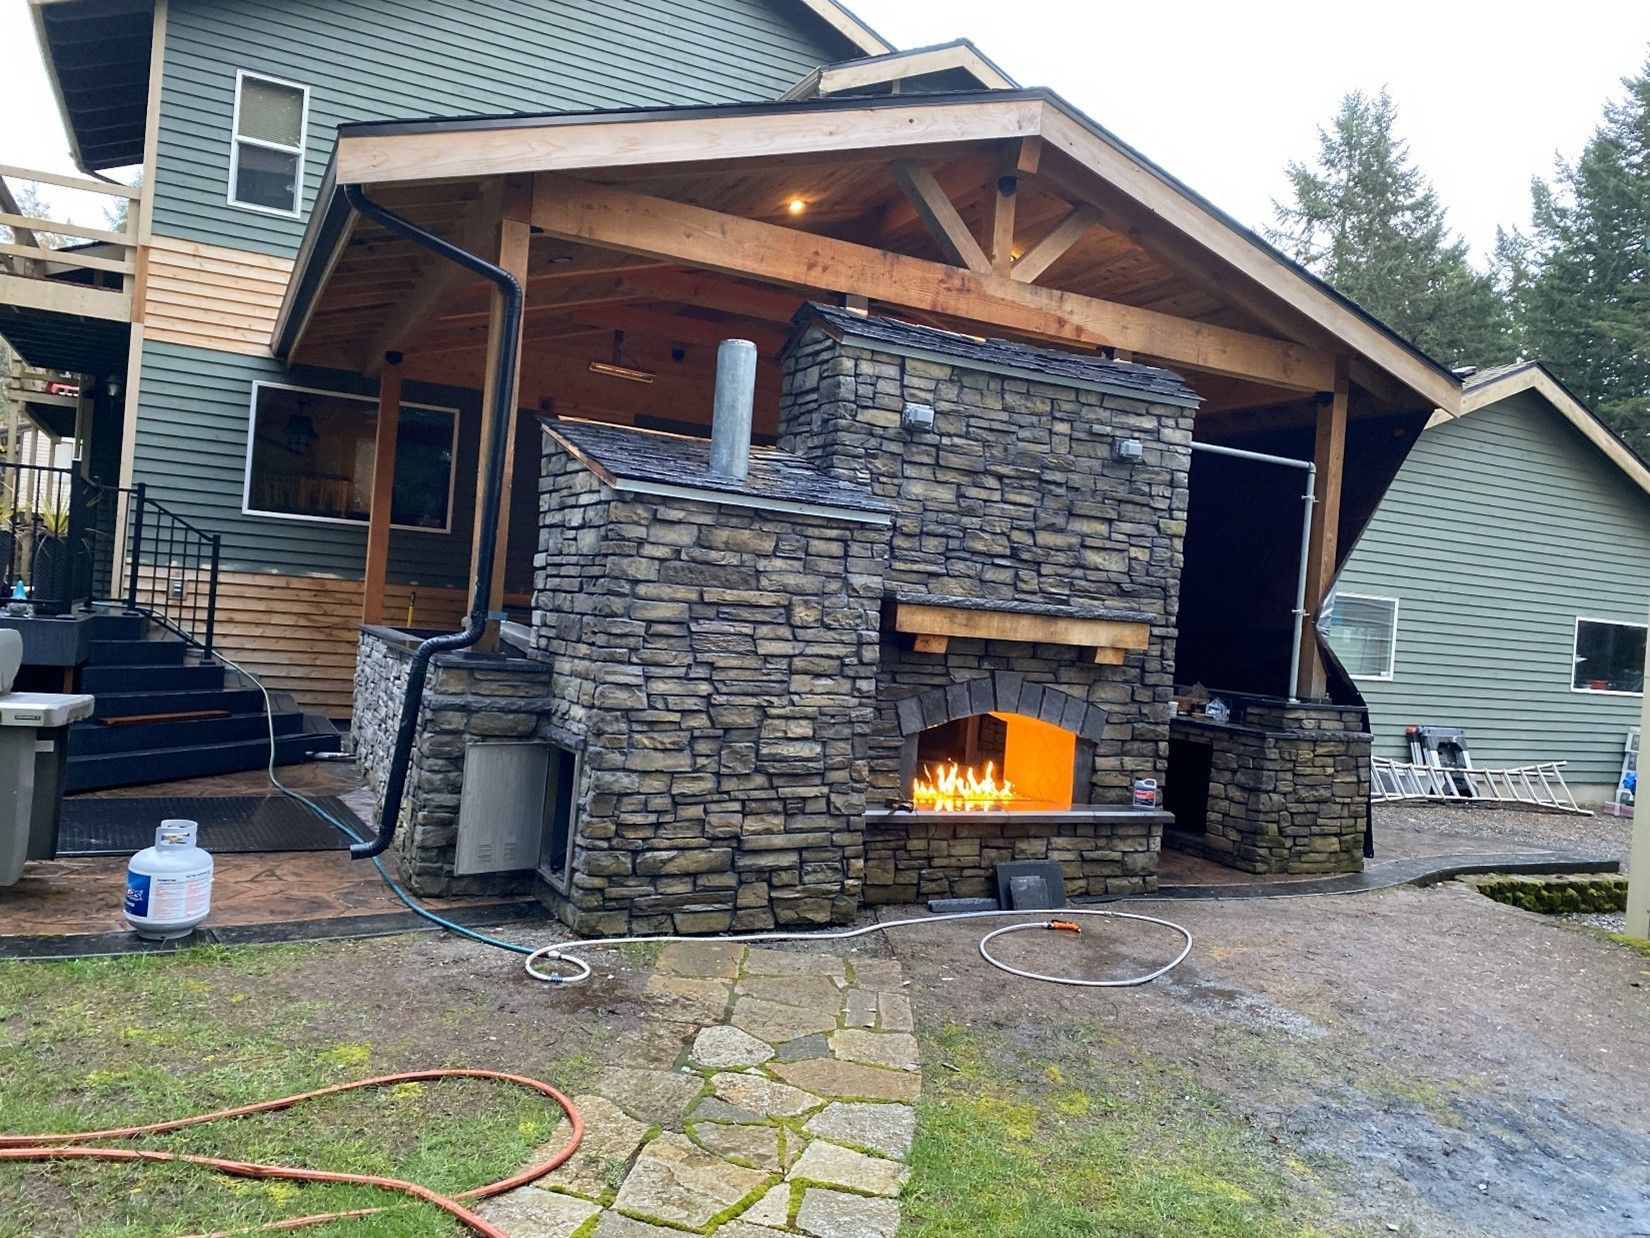 A house with an outdoor stone fireplace kitchen and custom roof cover for the patio in front of it